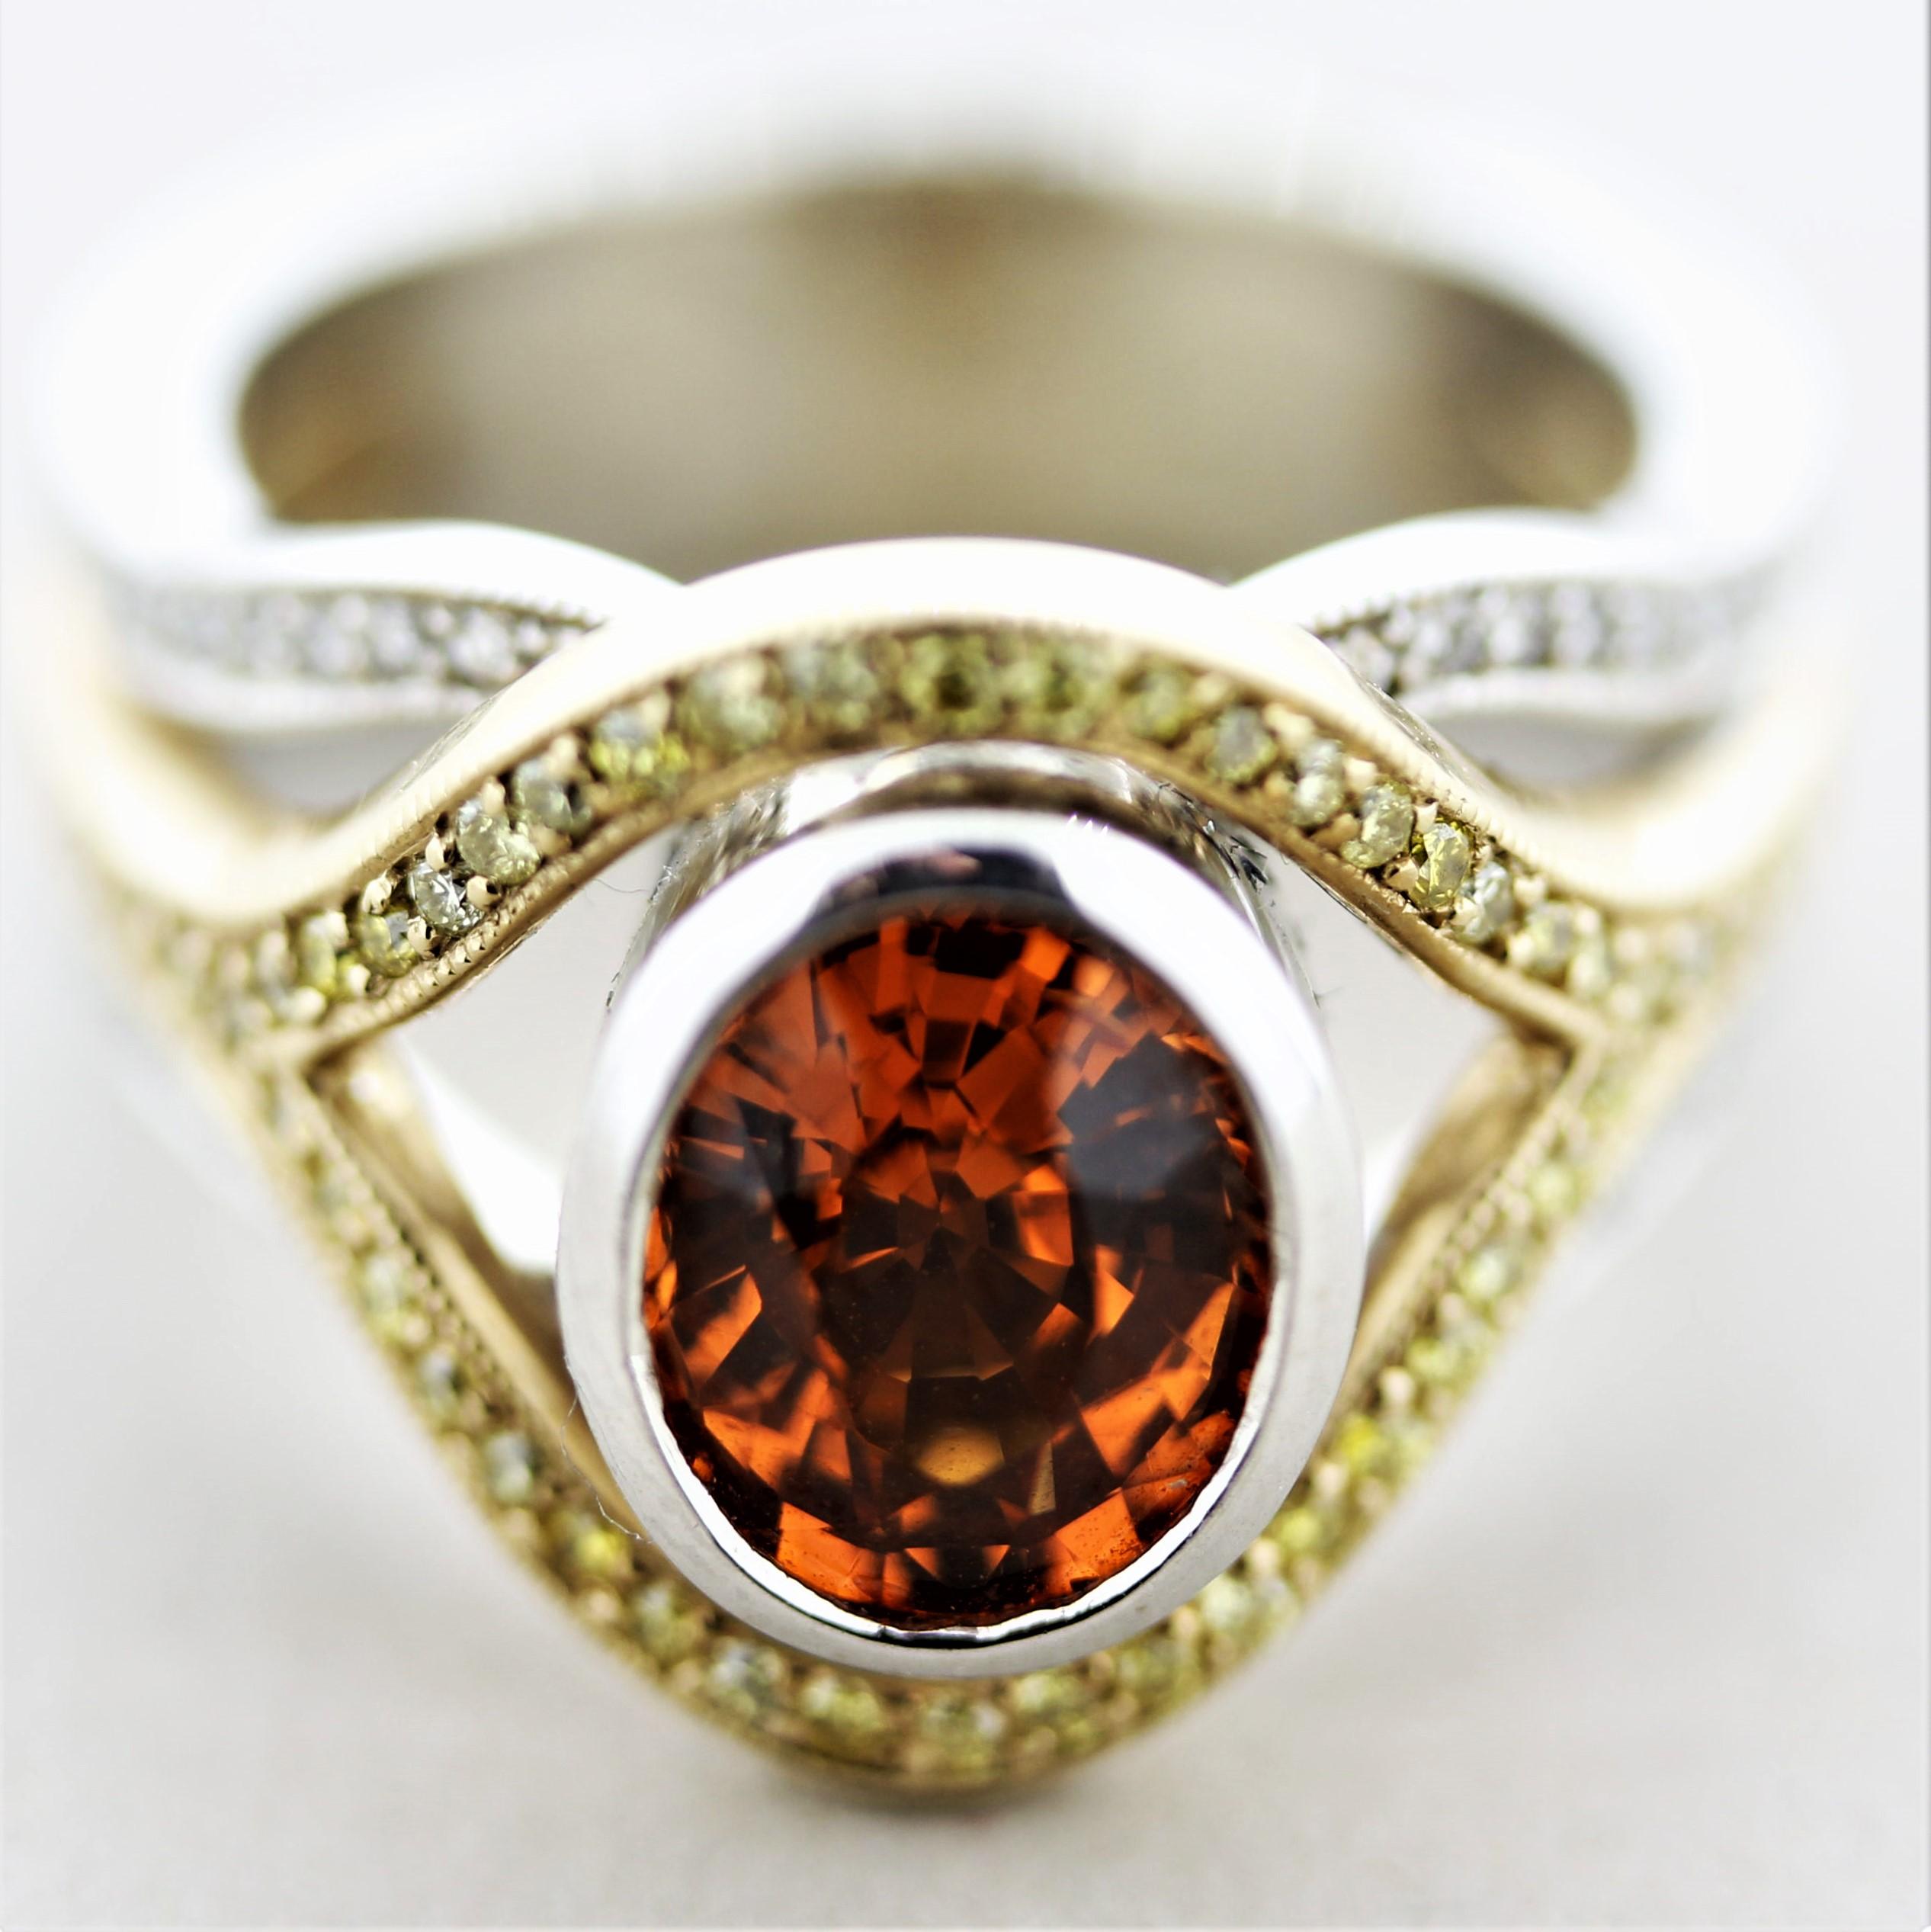 A unique and stylish ring featuring a fine spessartine garnet, known as mandarin in the trade when the color is fine, weighing 2.68 carats. It has a bright vivid orange color and is free of any visible inclusions which allows the stones natural